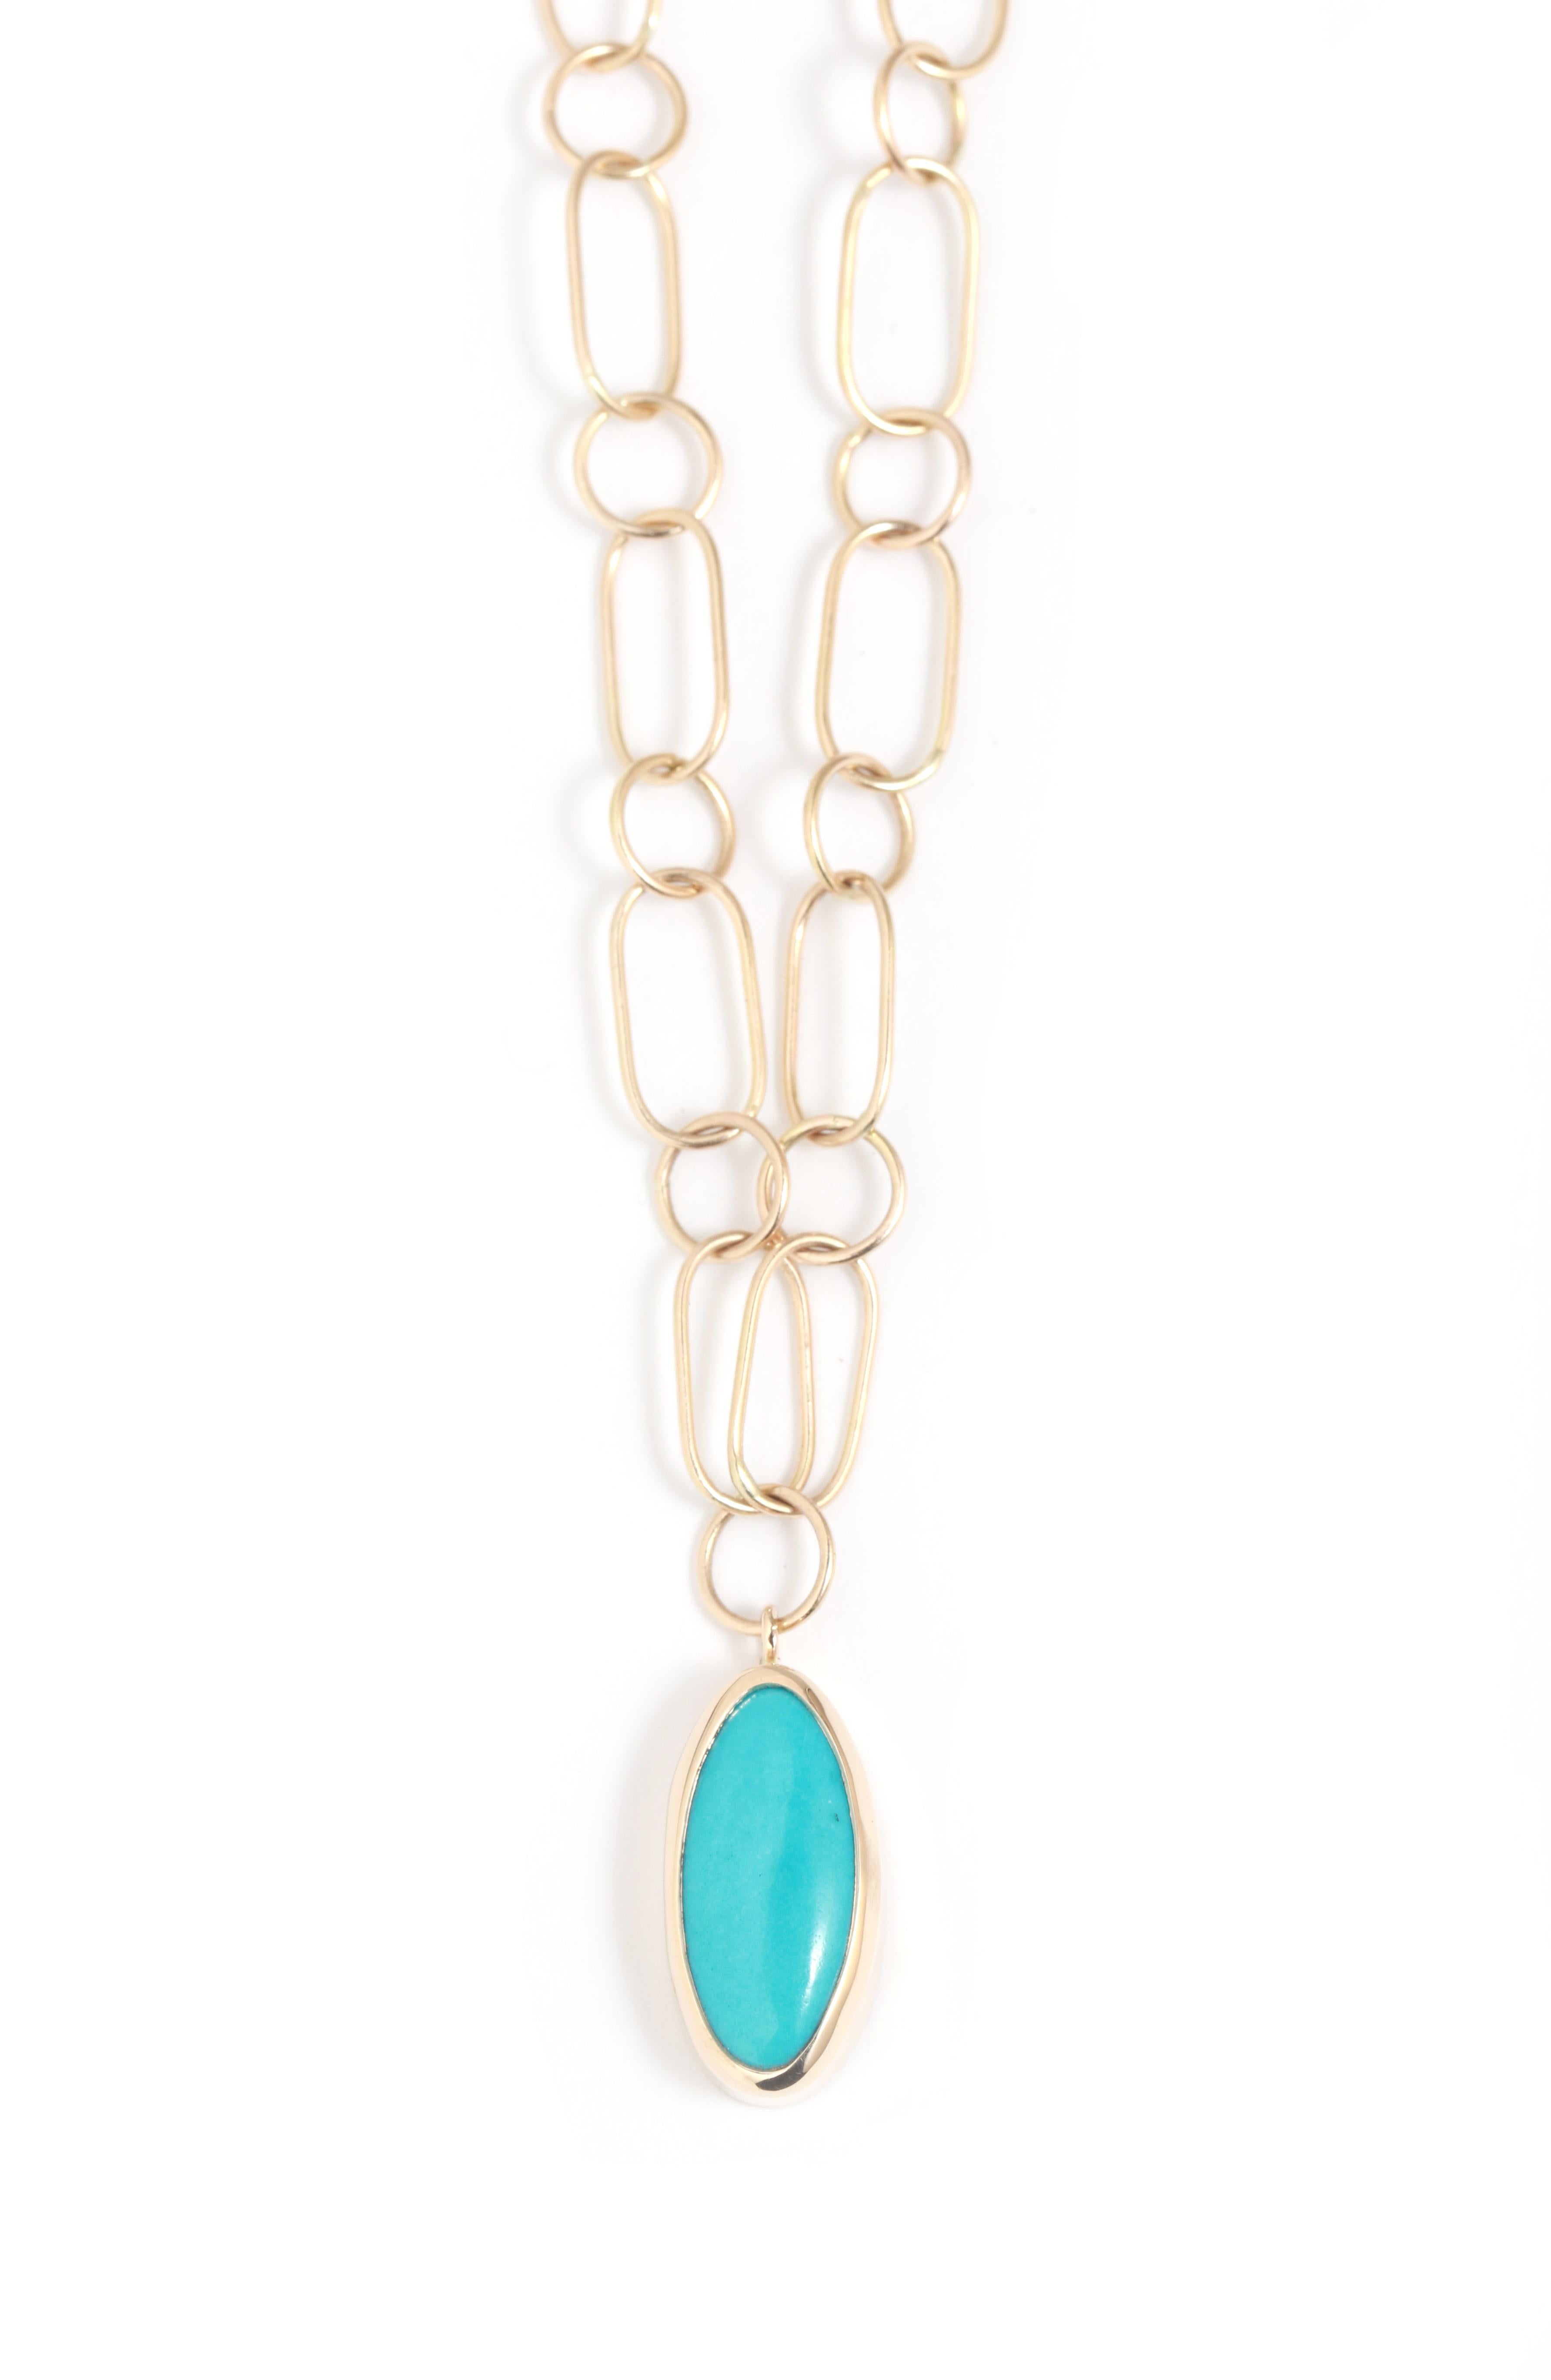 14k Yellow Gold Turquoise Necklace with Handmade Chain For Sale 2